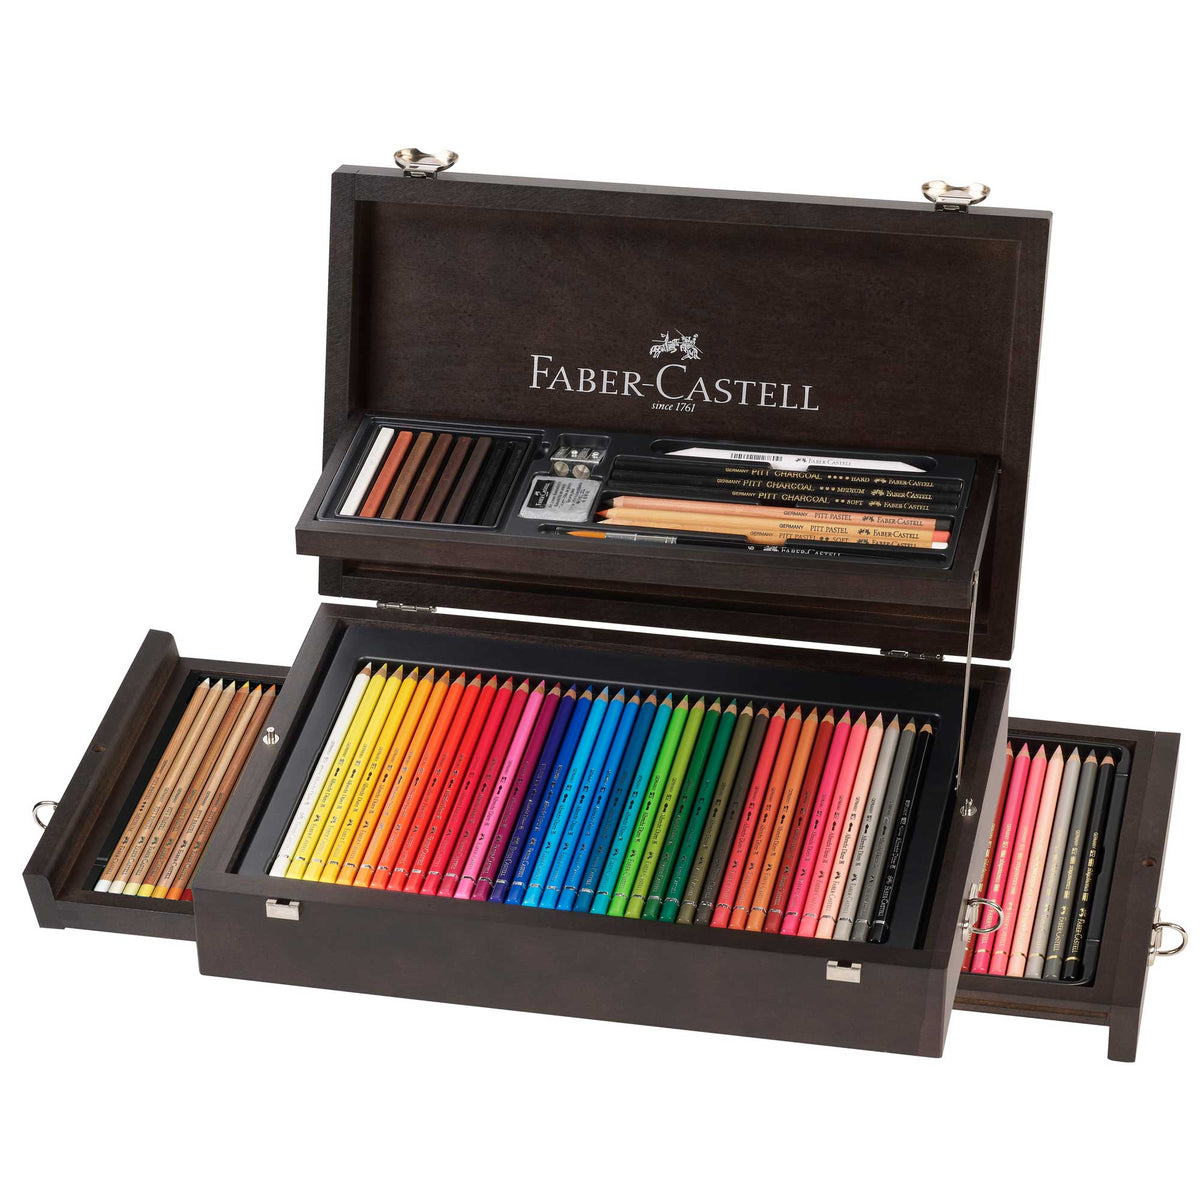 Faber-Castell Art &amp; Graphic Collection Wooden Case - 125 Pieces